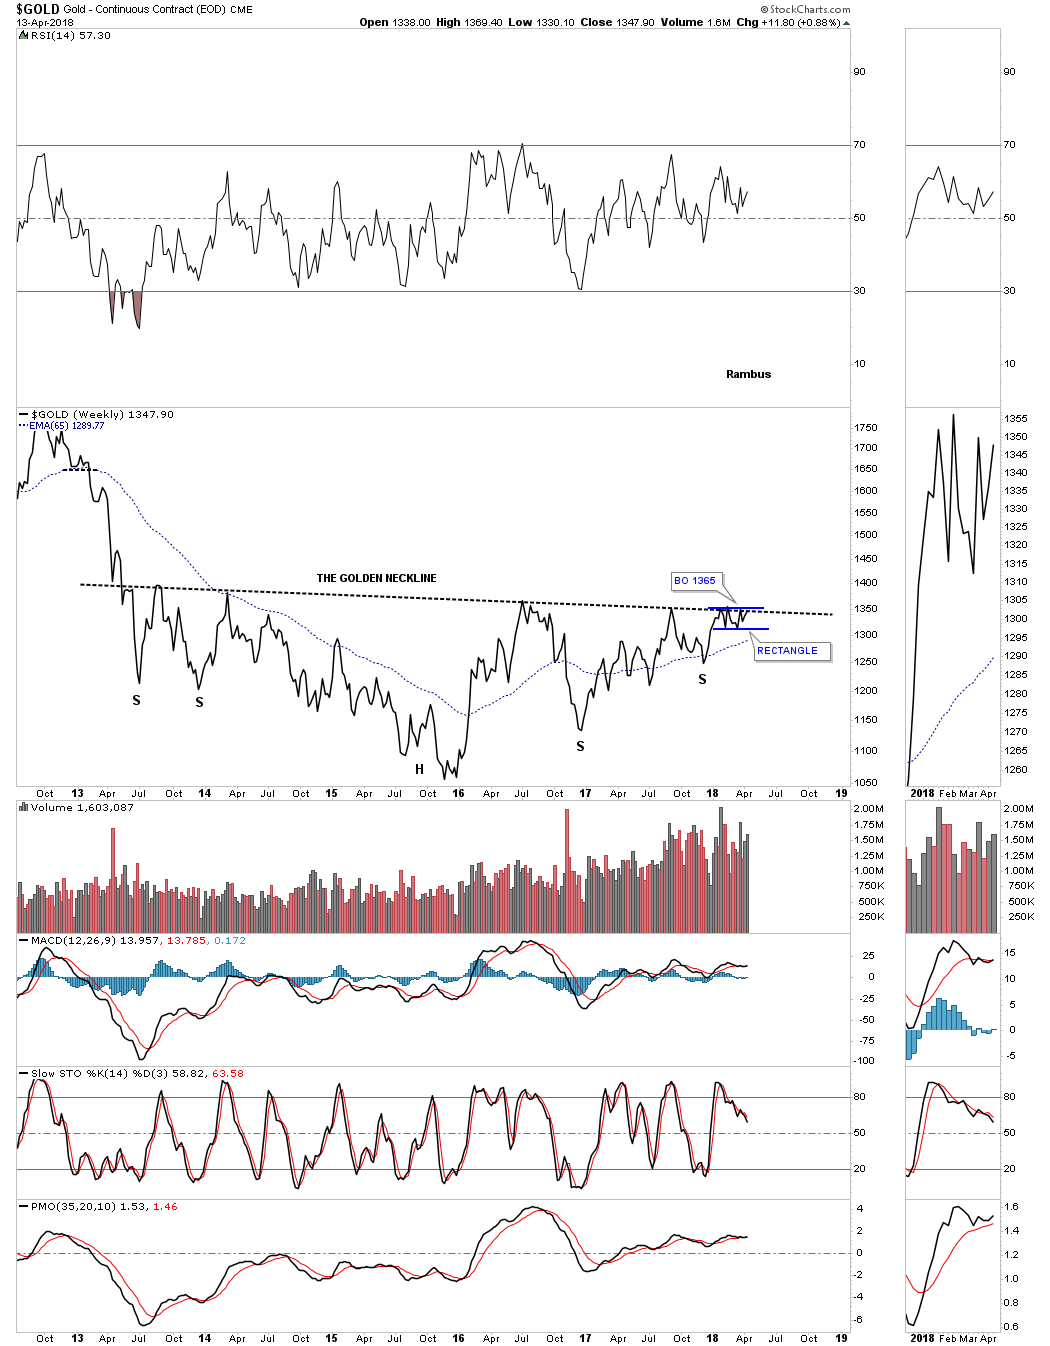 Gold Weekly 2012-2018